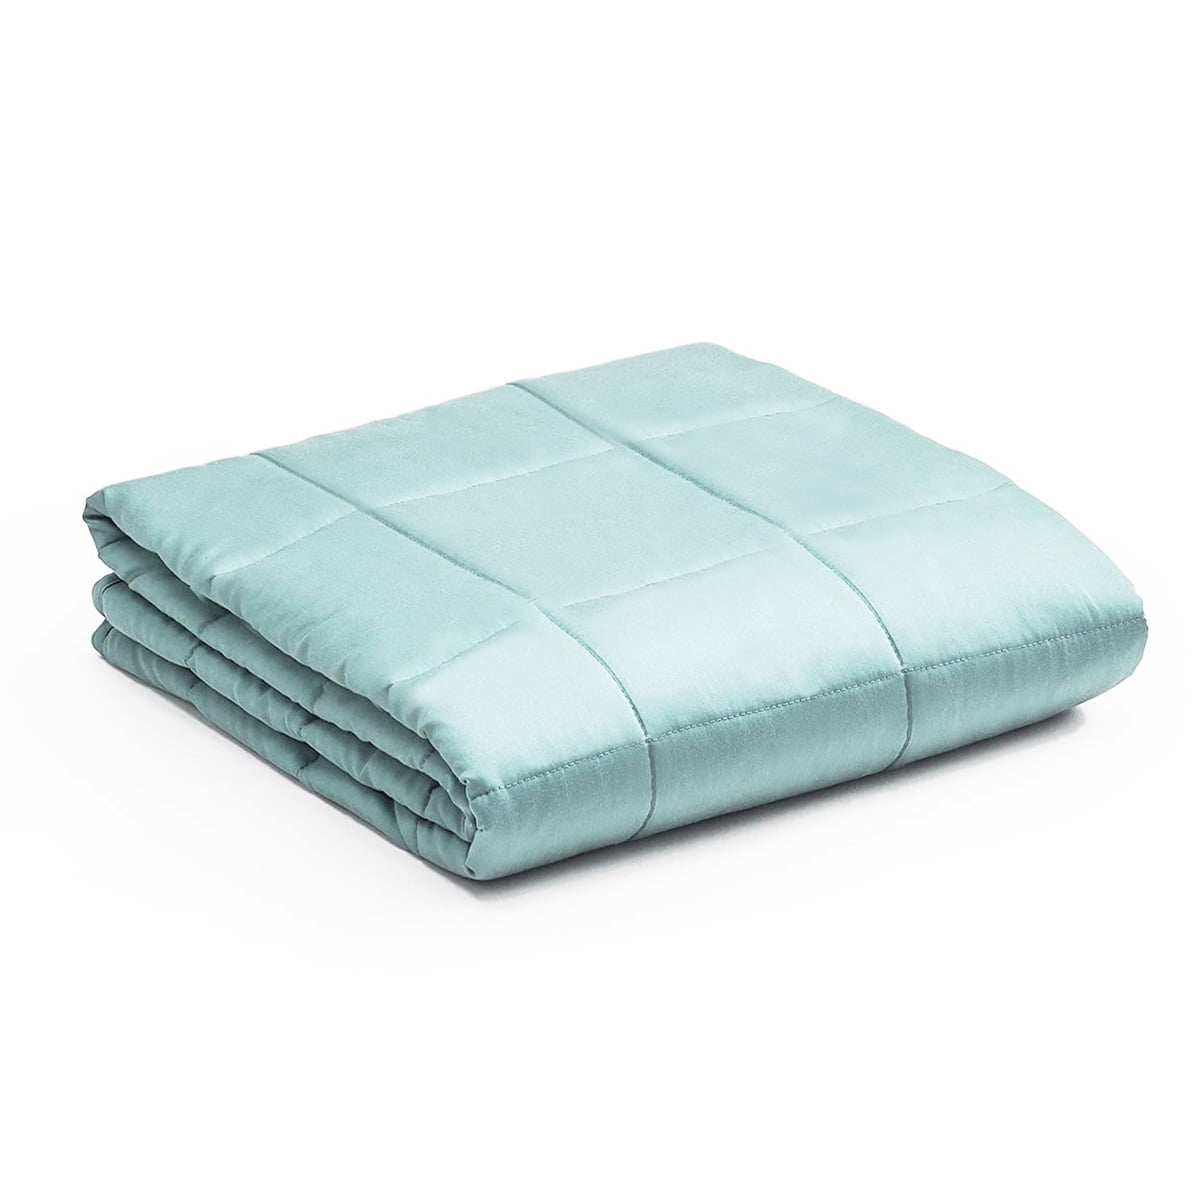 Details about   Soft Fabric Breathable Premium Cooling Heavy Weighted Blanket-15 lbs Color G